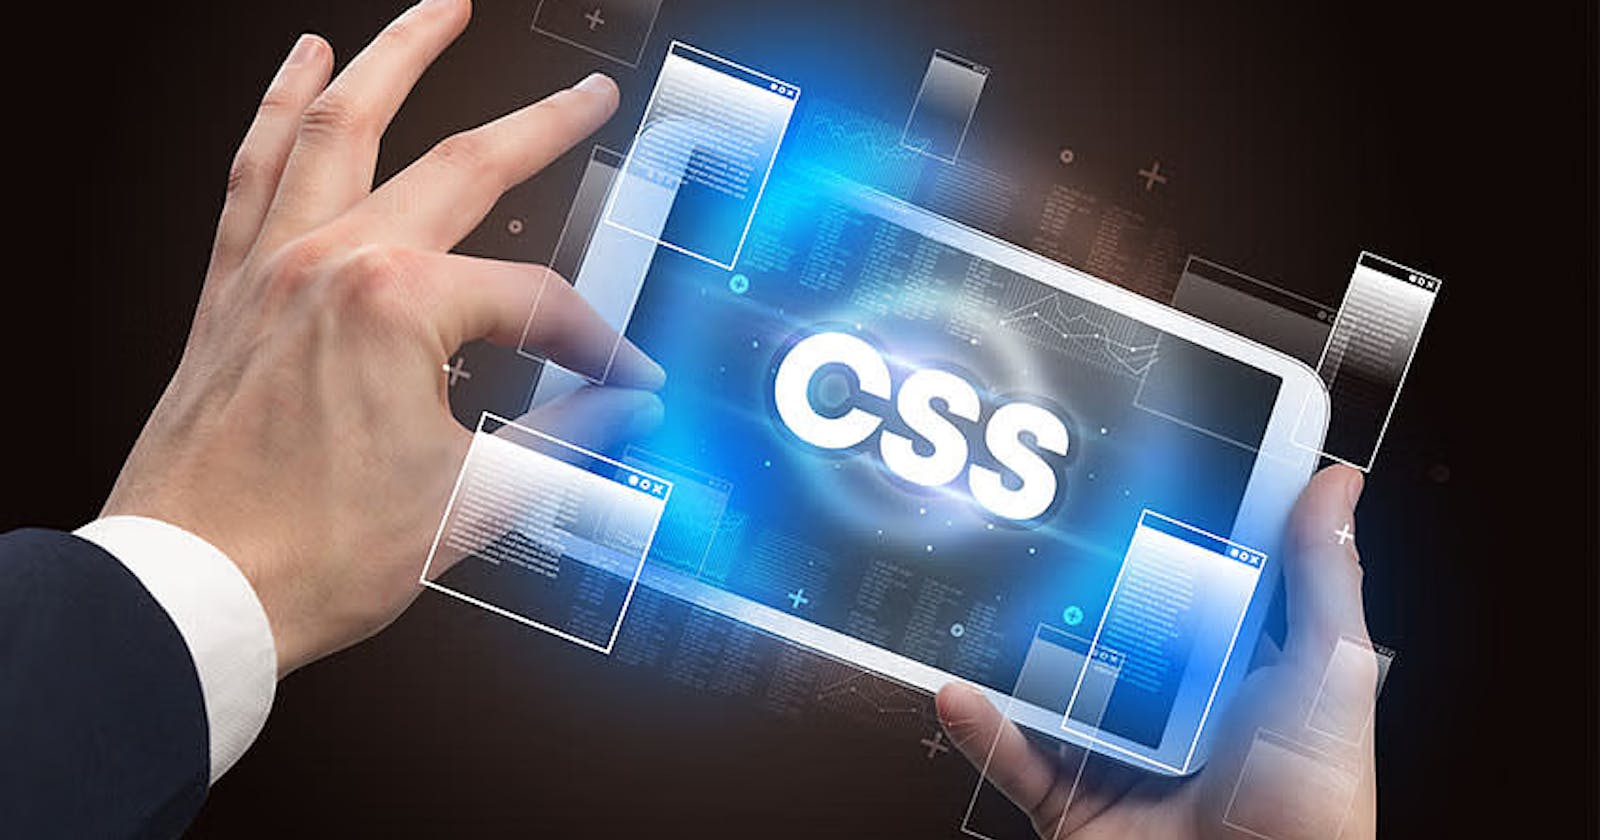 What is meant by CSS ?